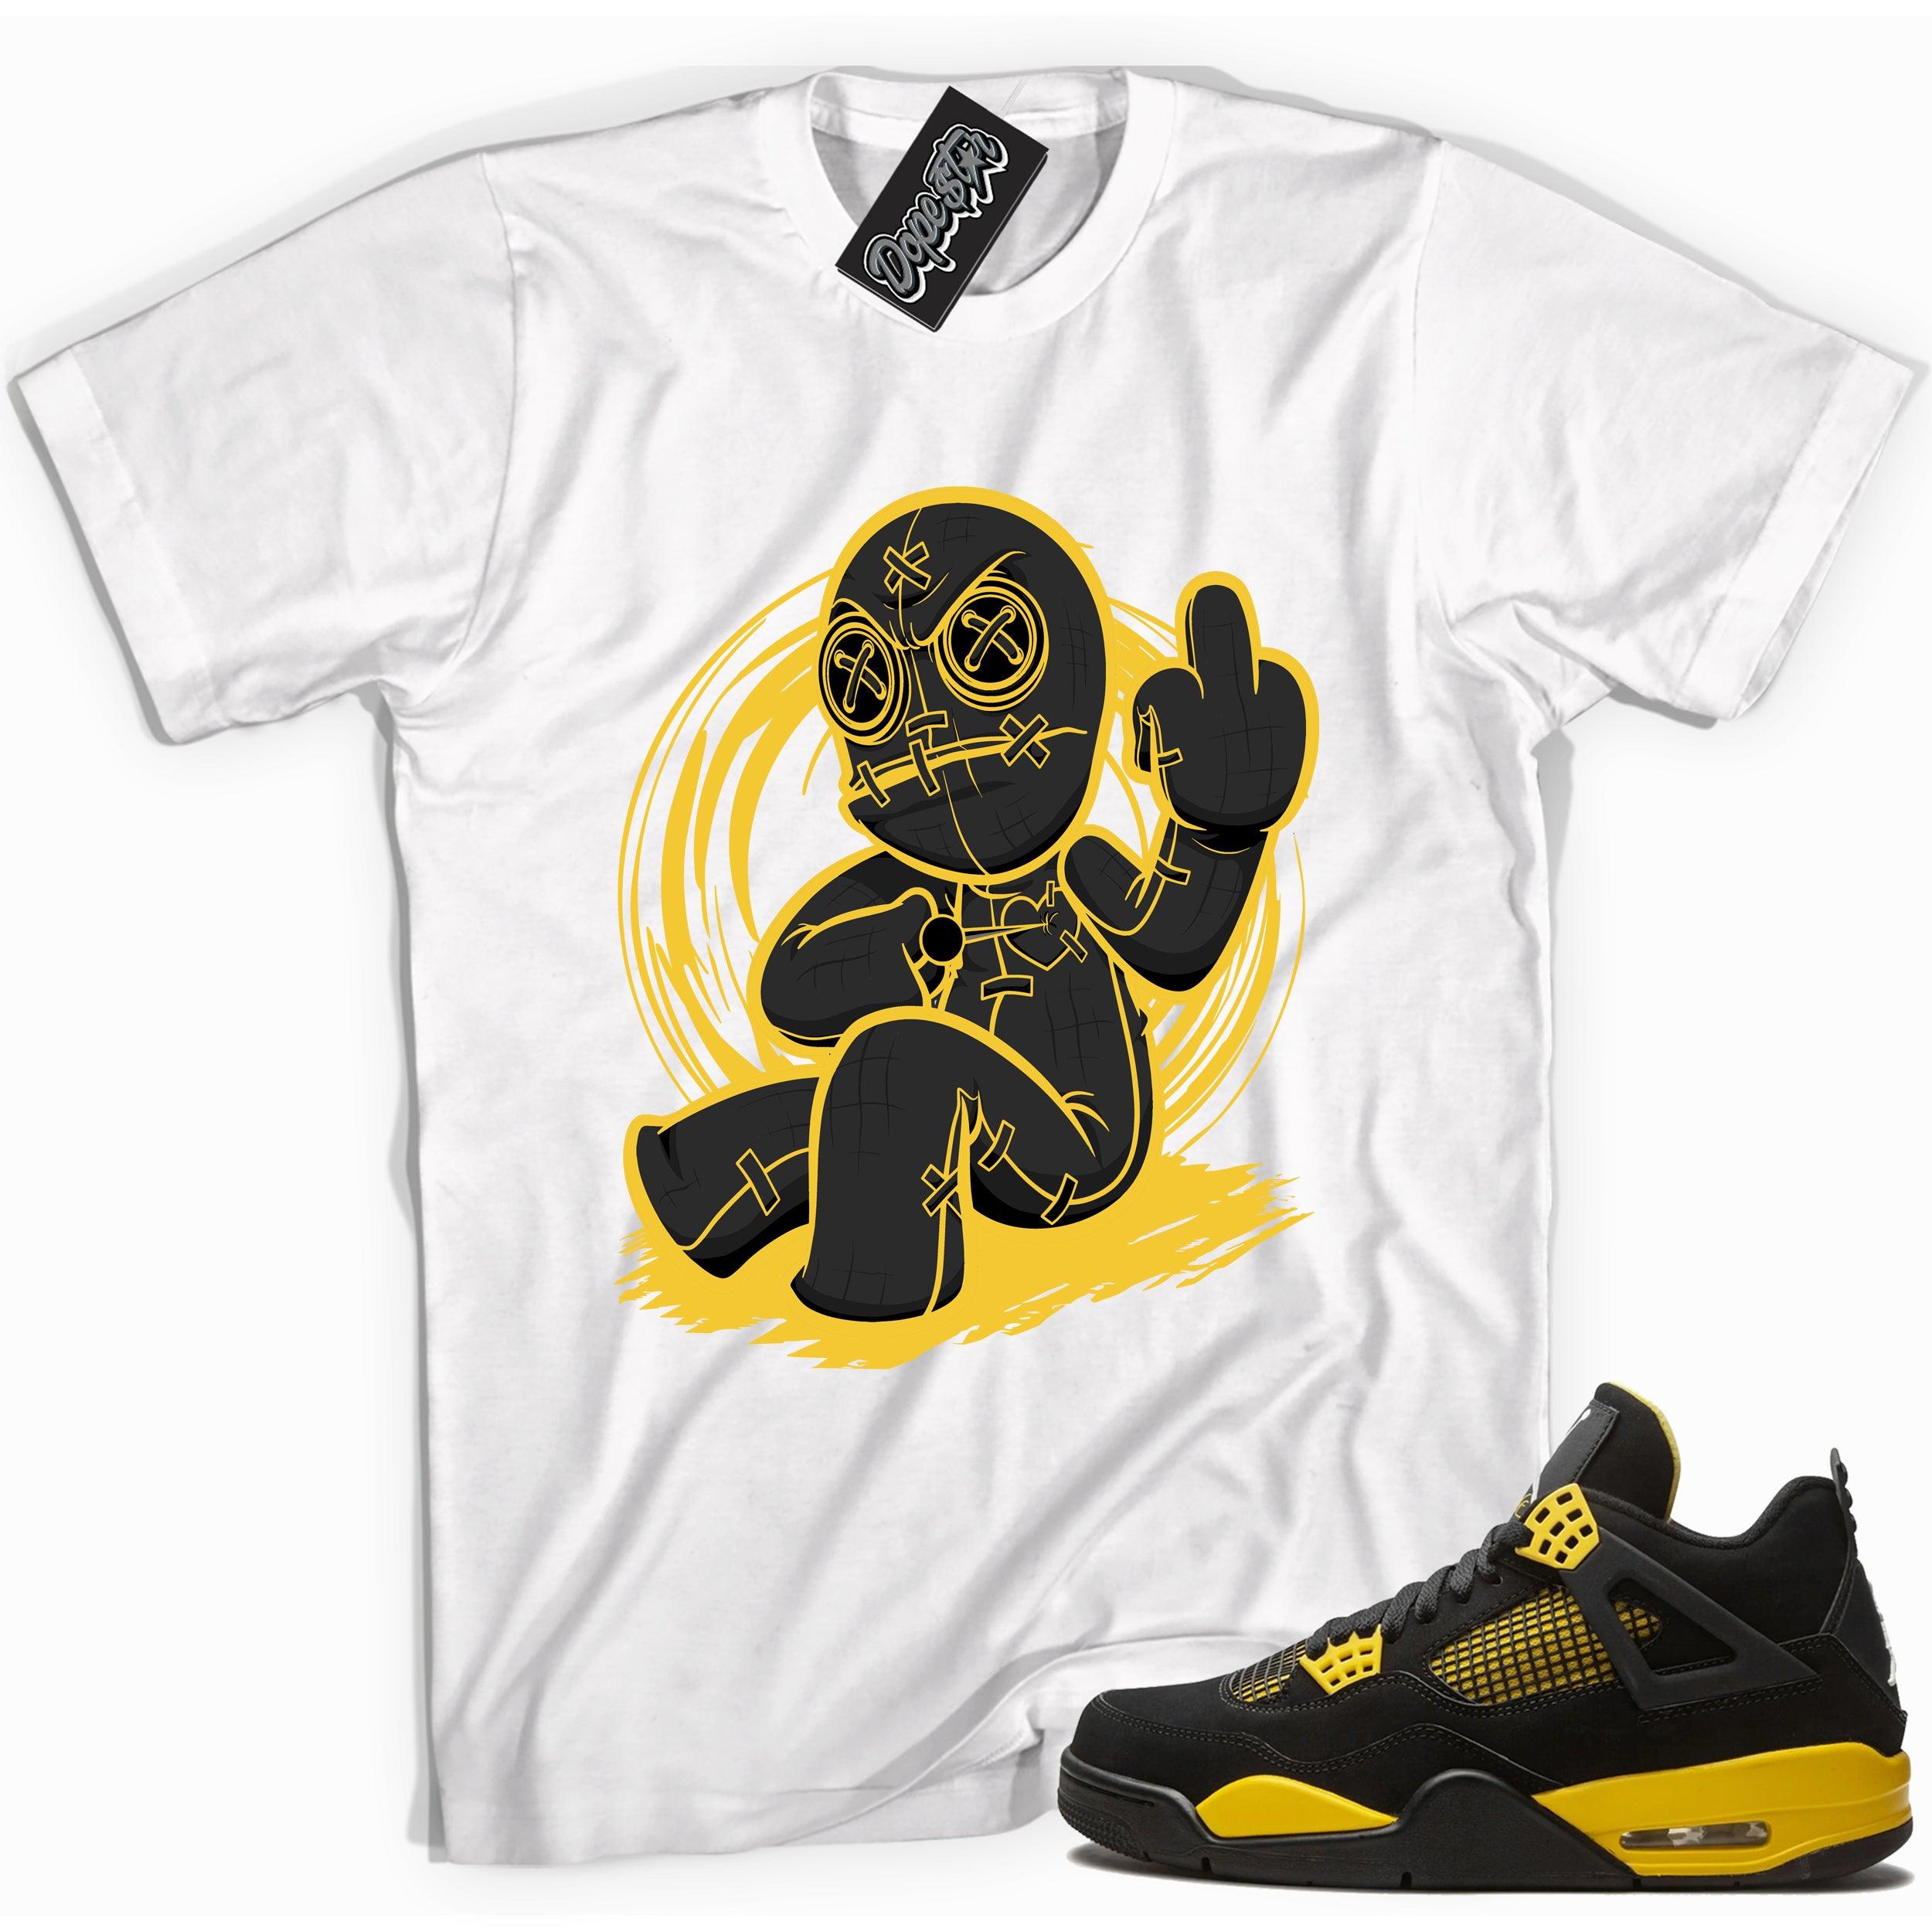 Cool white graphic tee with 'voodoo doll' print, that perfectly matches Air Jordan 4 Thunder sneakers